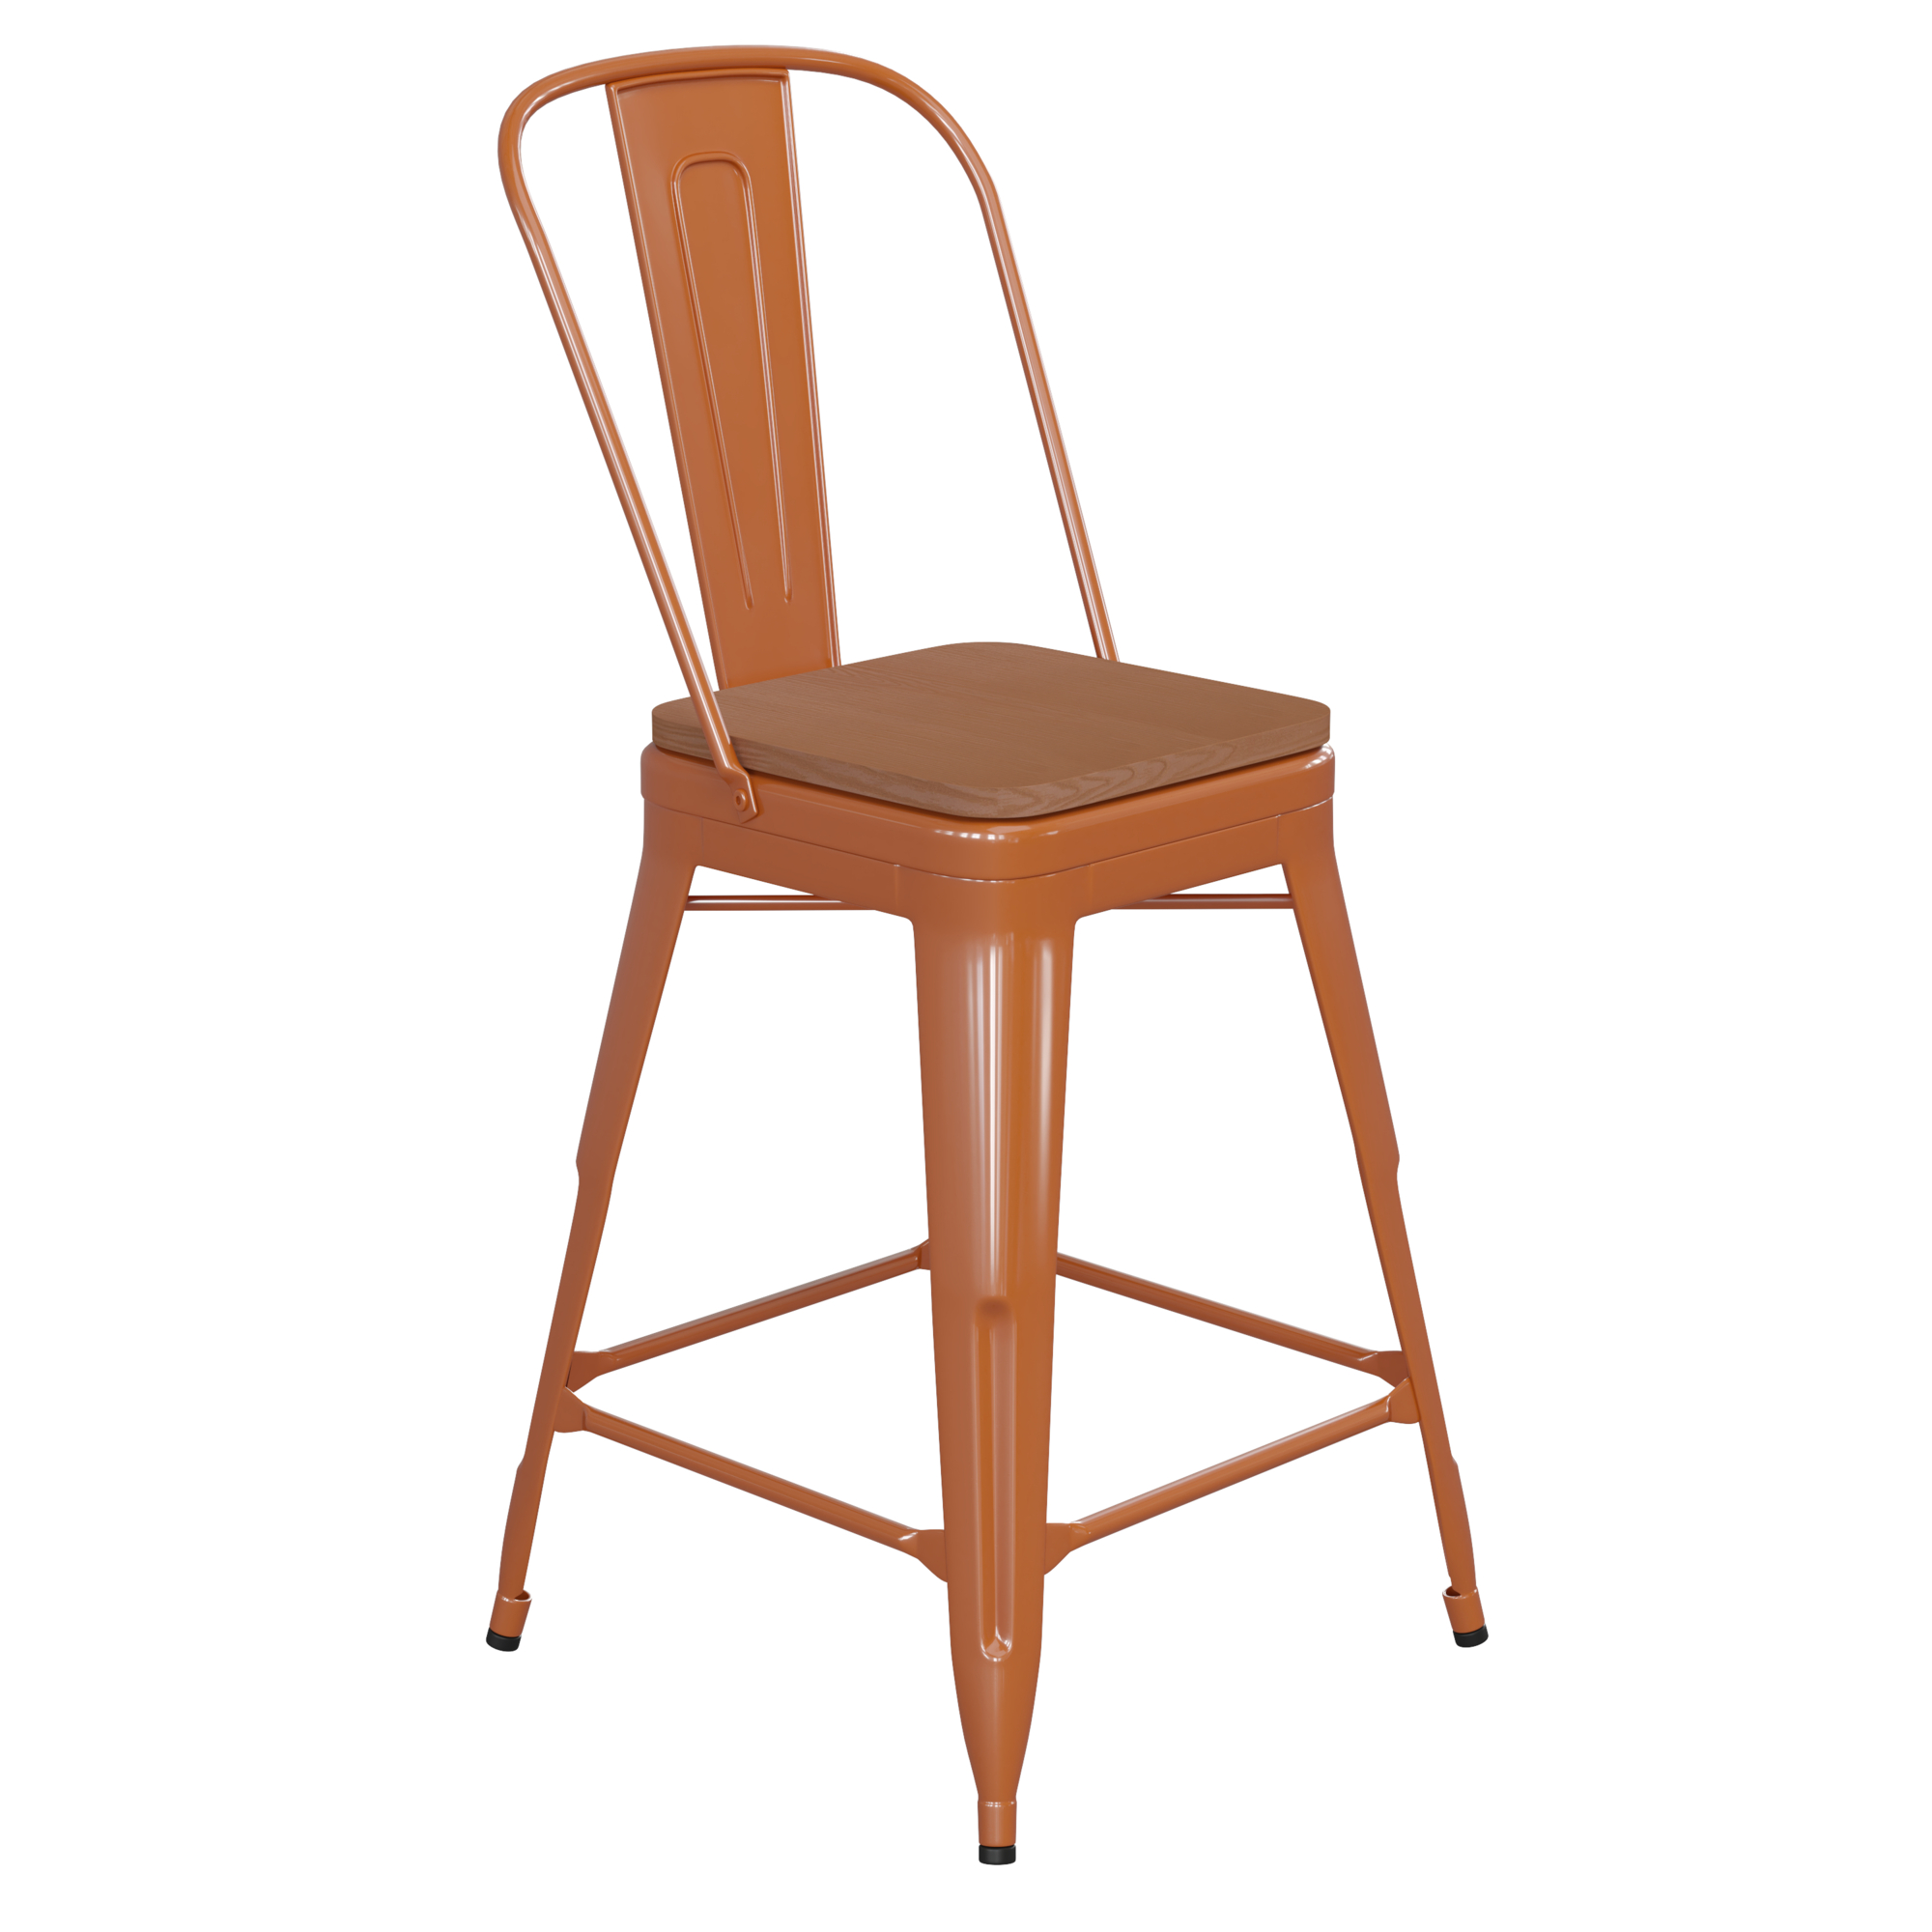 Flash Furniture, 24Inch Orange Metal Counter Stool-Teak Poly Seat, Primary Color Orange, Included (qty.) 1, Model CH3132024GORP2T